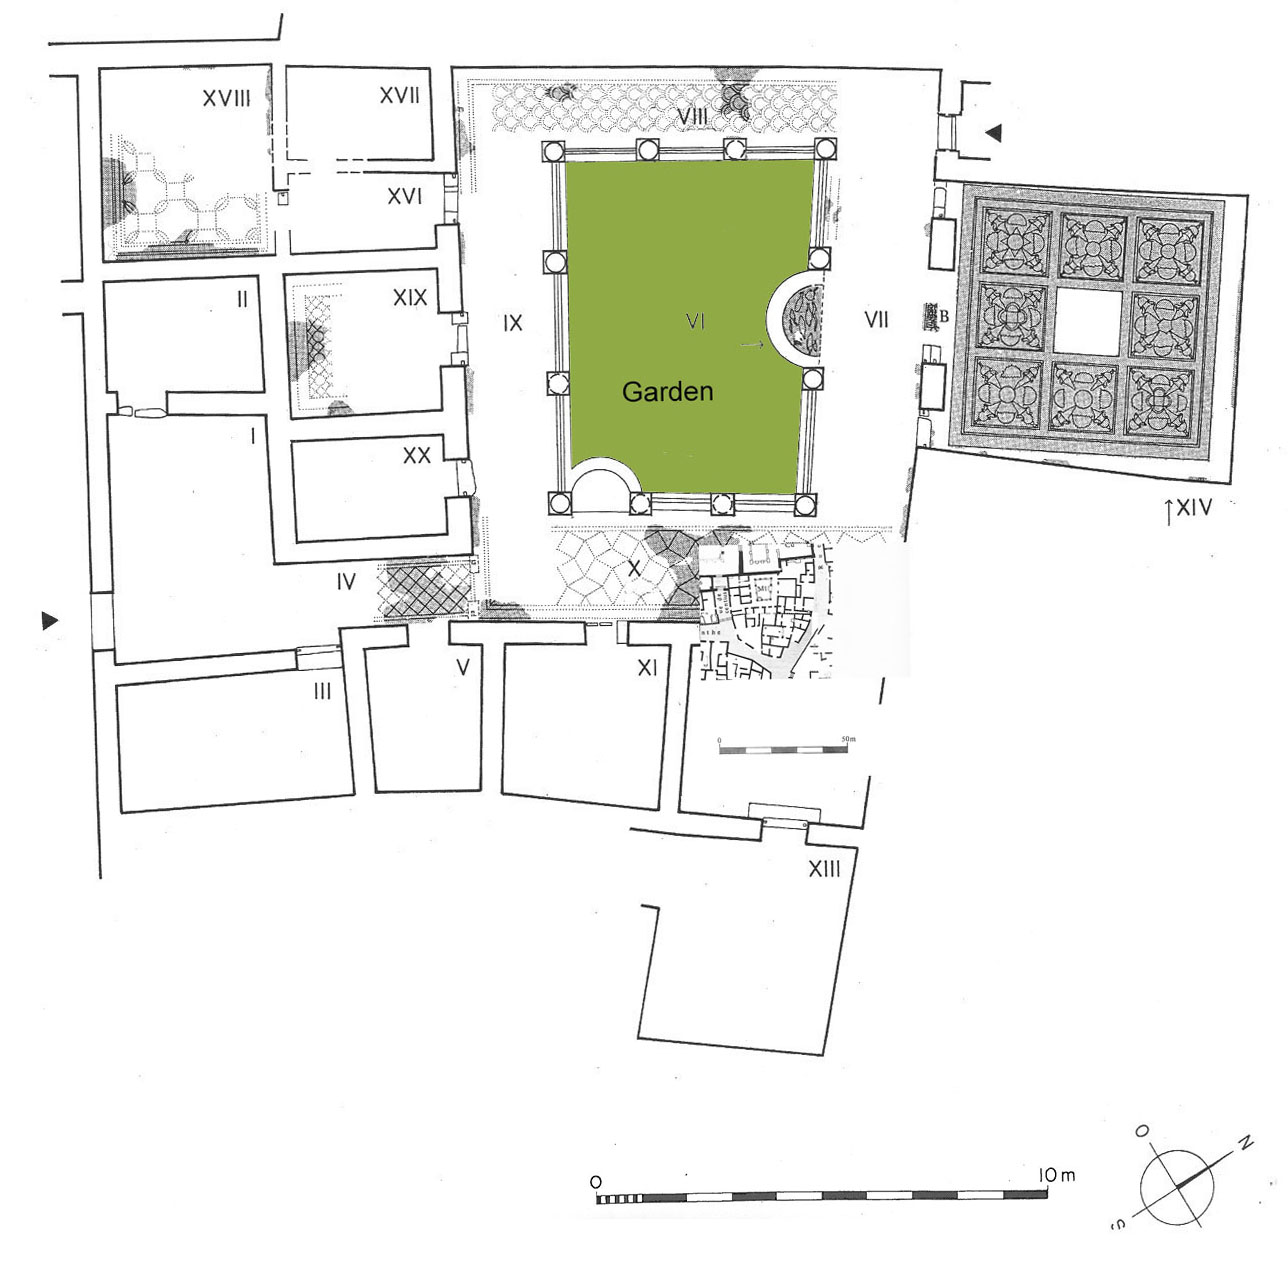 Plan of the House of Nicentus